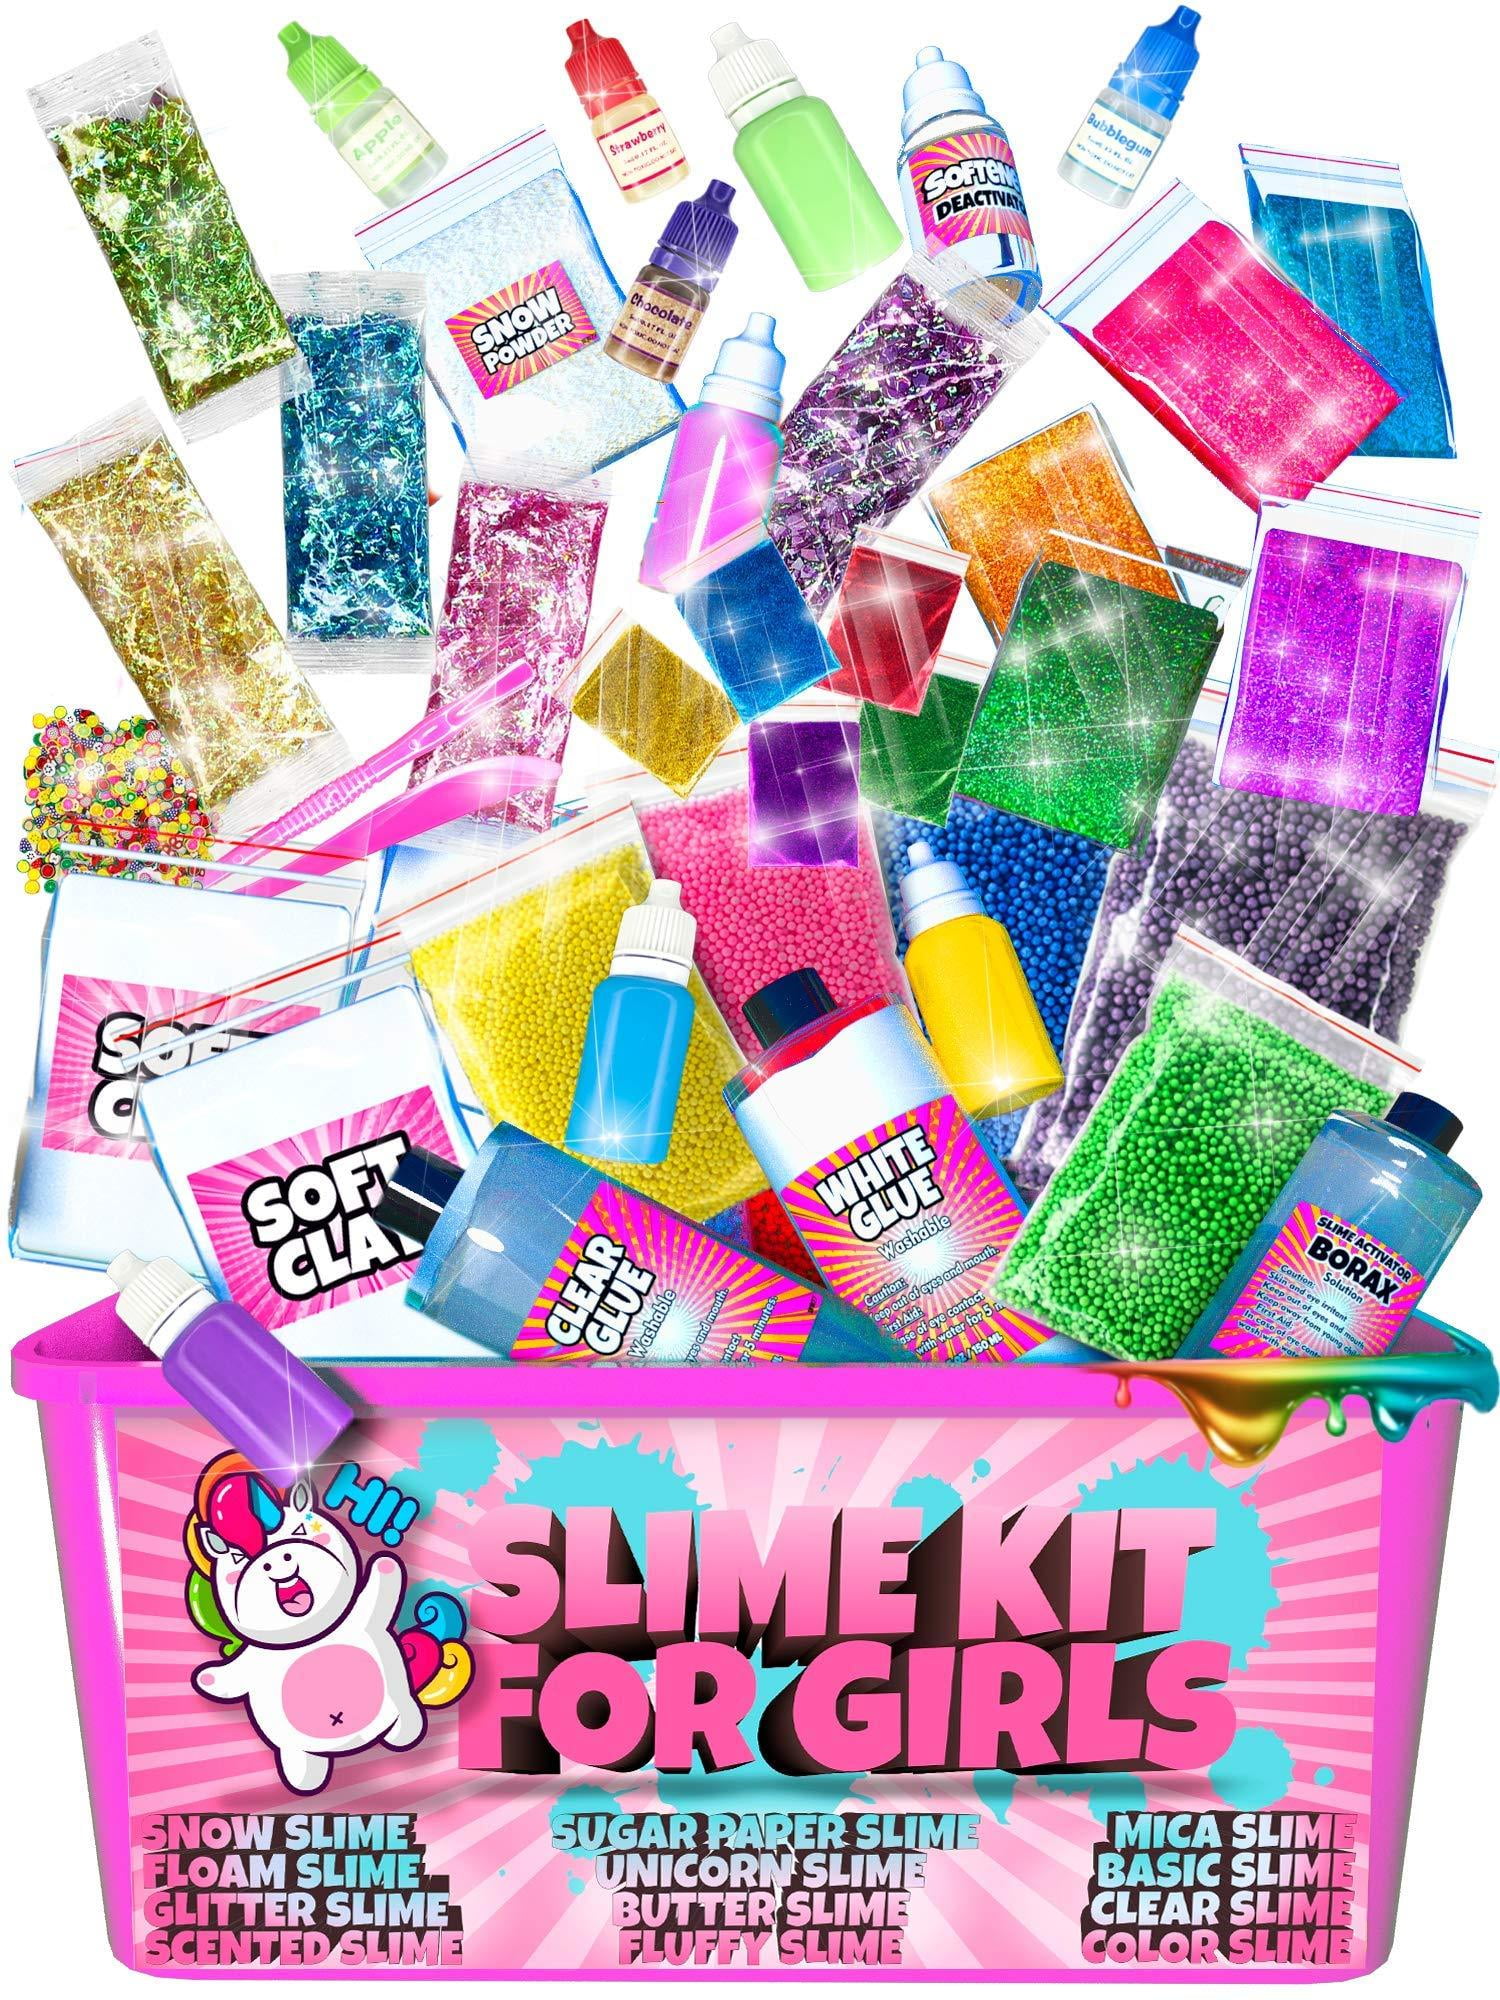 GirlZone My Cutie Pie Slime Kit, DIY Slime Kit for Girls 10-12 to Make  Slime Keychains with Fun Mix-Ins, Great Gift Idea, Slime Creation Kit and  Kids